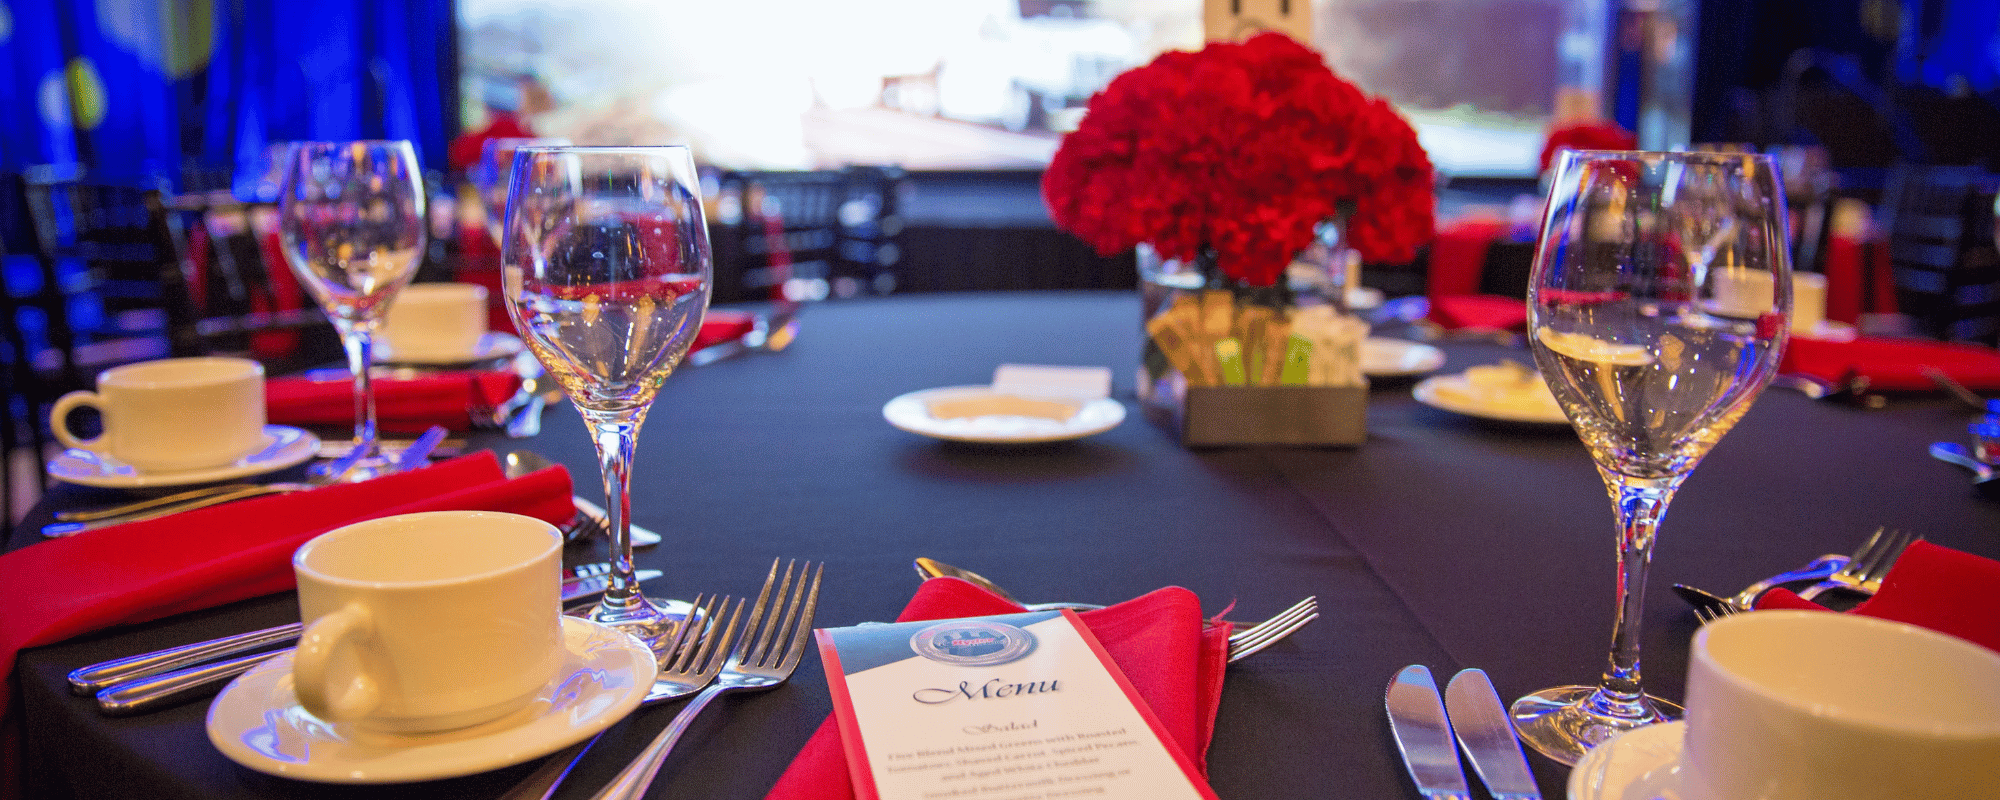 event branding elements include things like table decor, menus, and even the color of your napkins